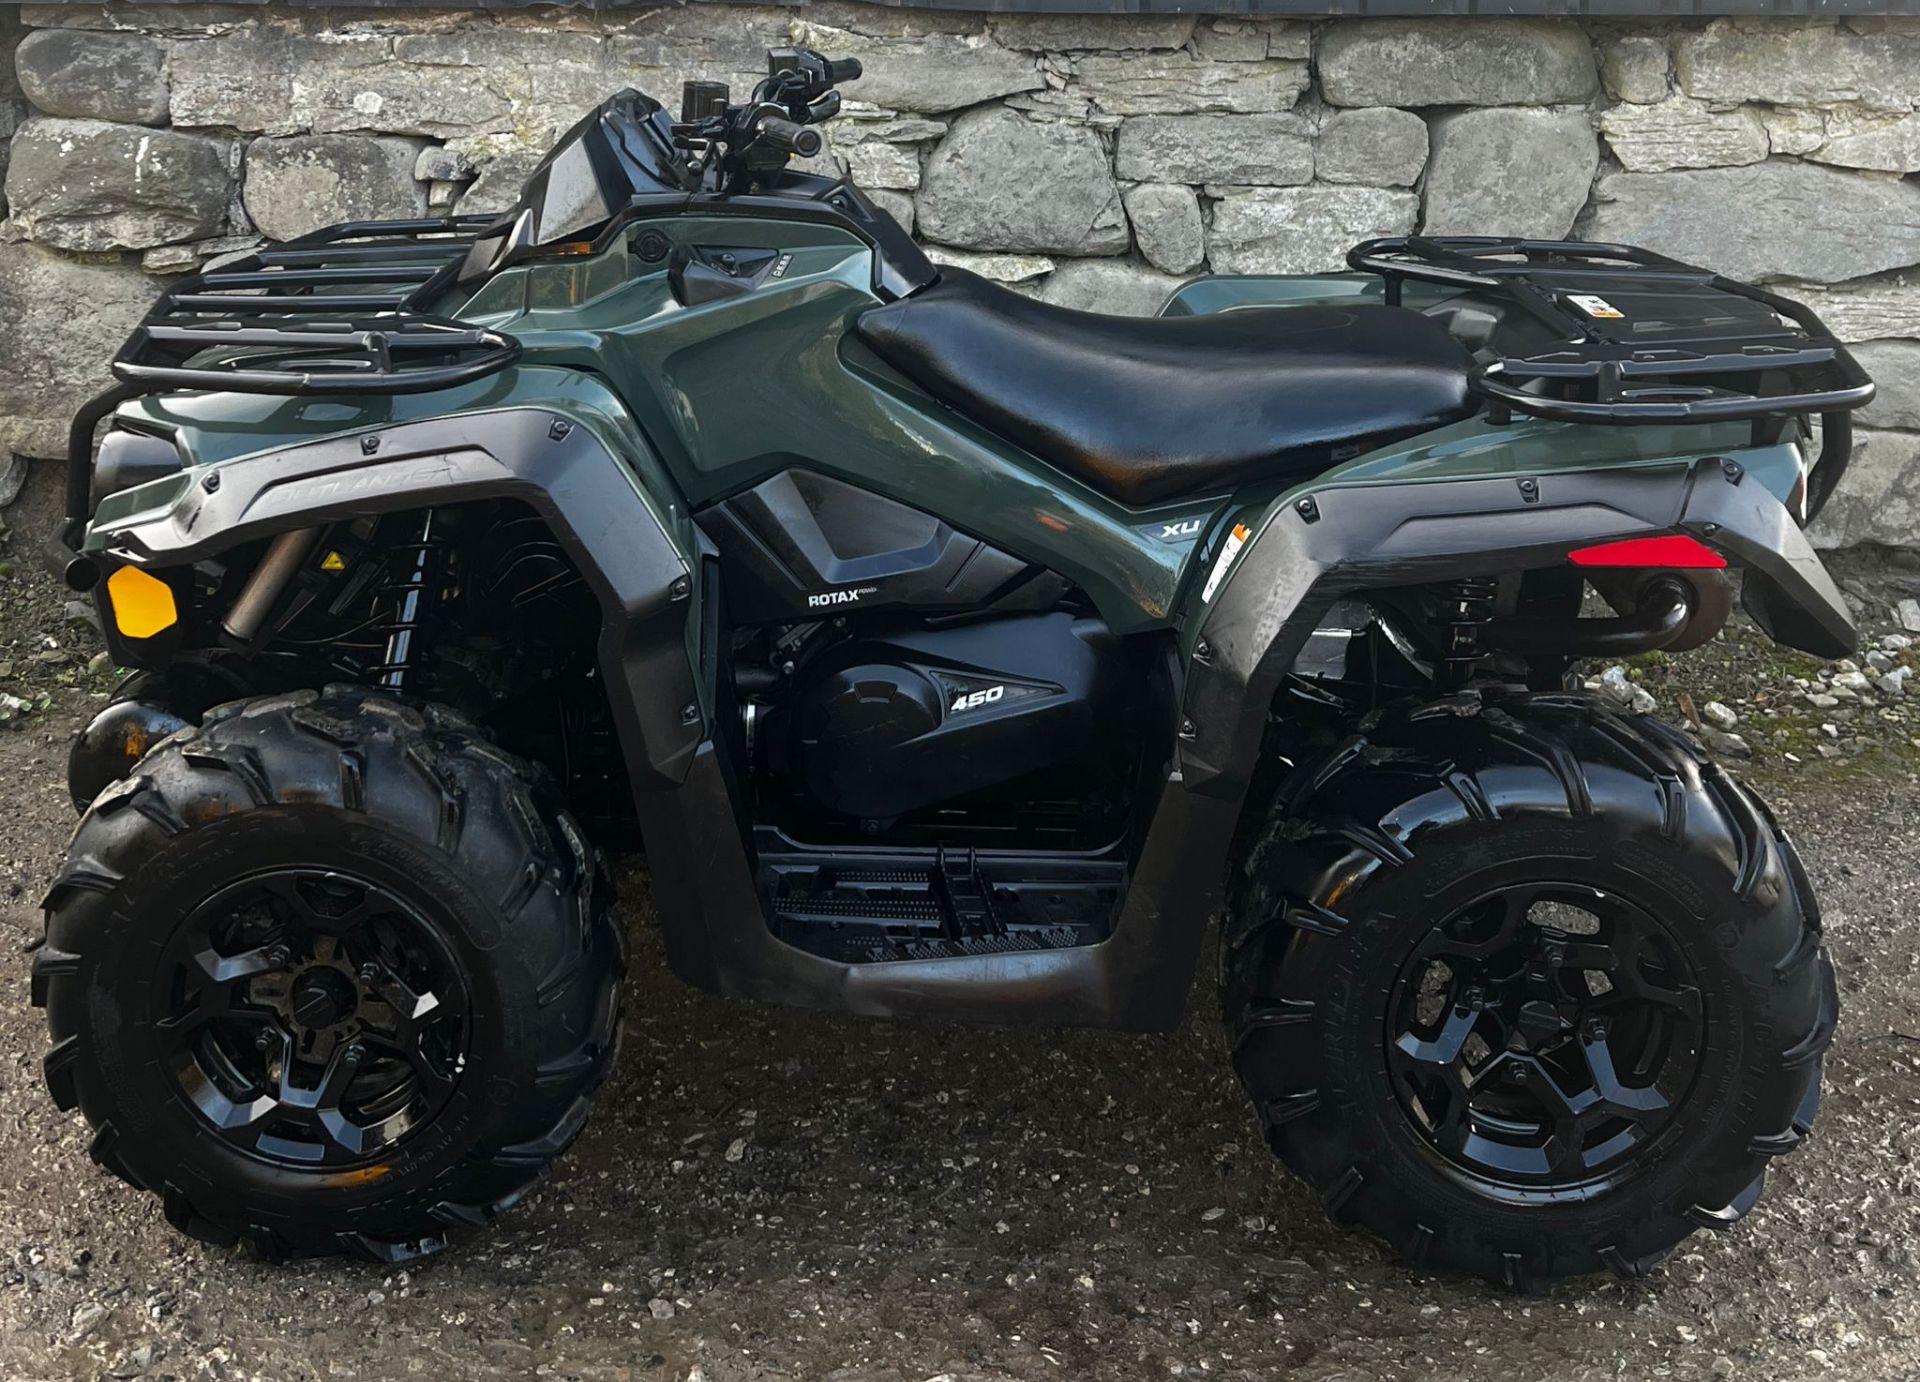 2020 CAN AM QUAD 450 - Image 4 of 8